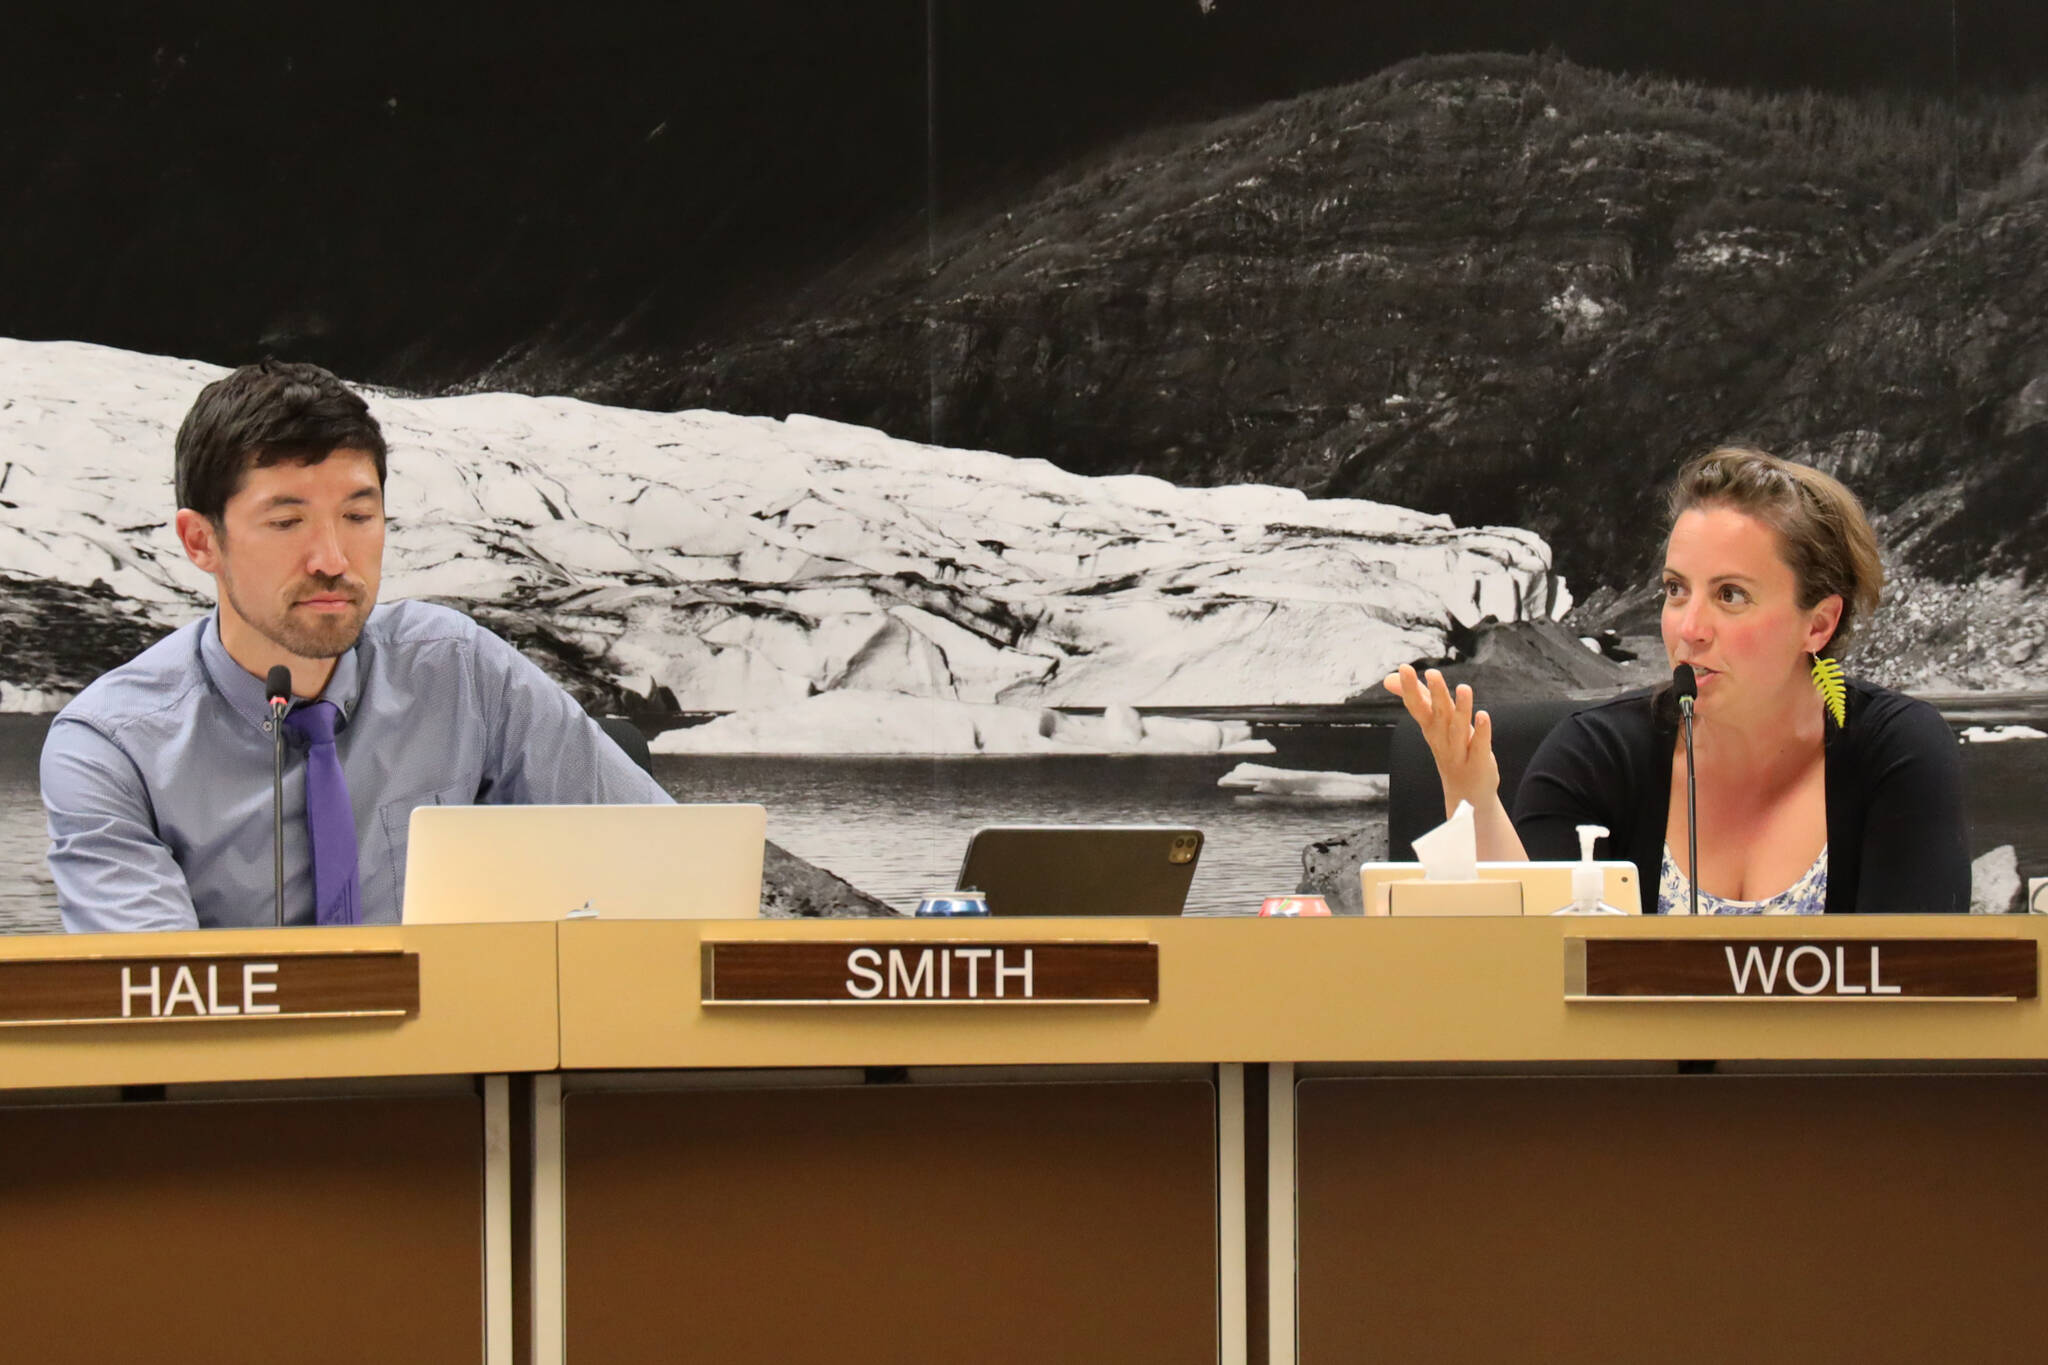 City and Borough of Juneau Assembly member Greg Smith and Christine Woll discuss the mill rate during Wednesday night’s Finance Committee meeting. Member voted to decrease the mill rate to 10.16. (Clarise Larson / Juneau Empire)